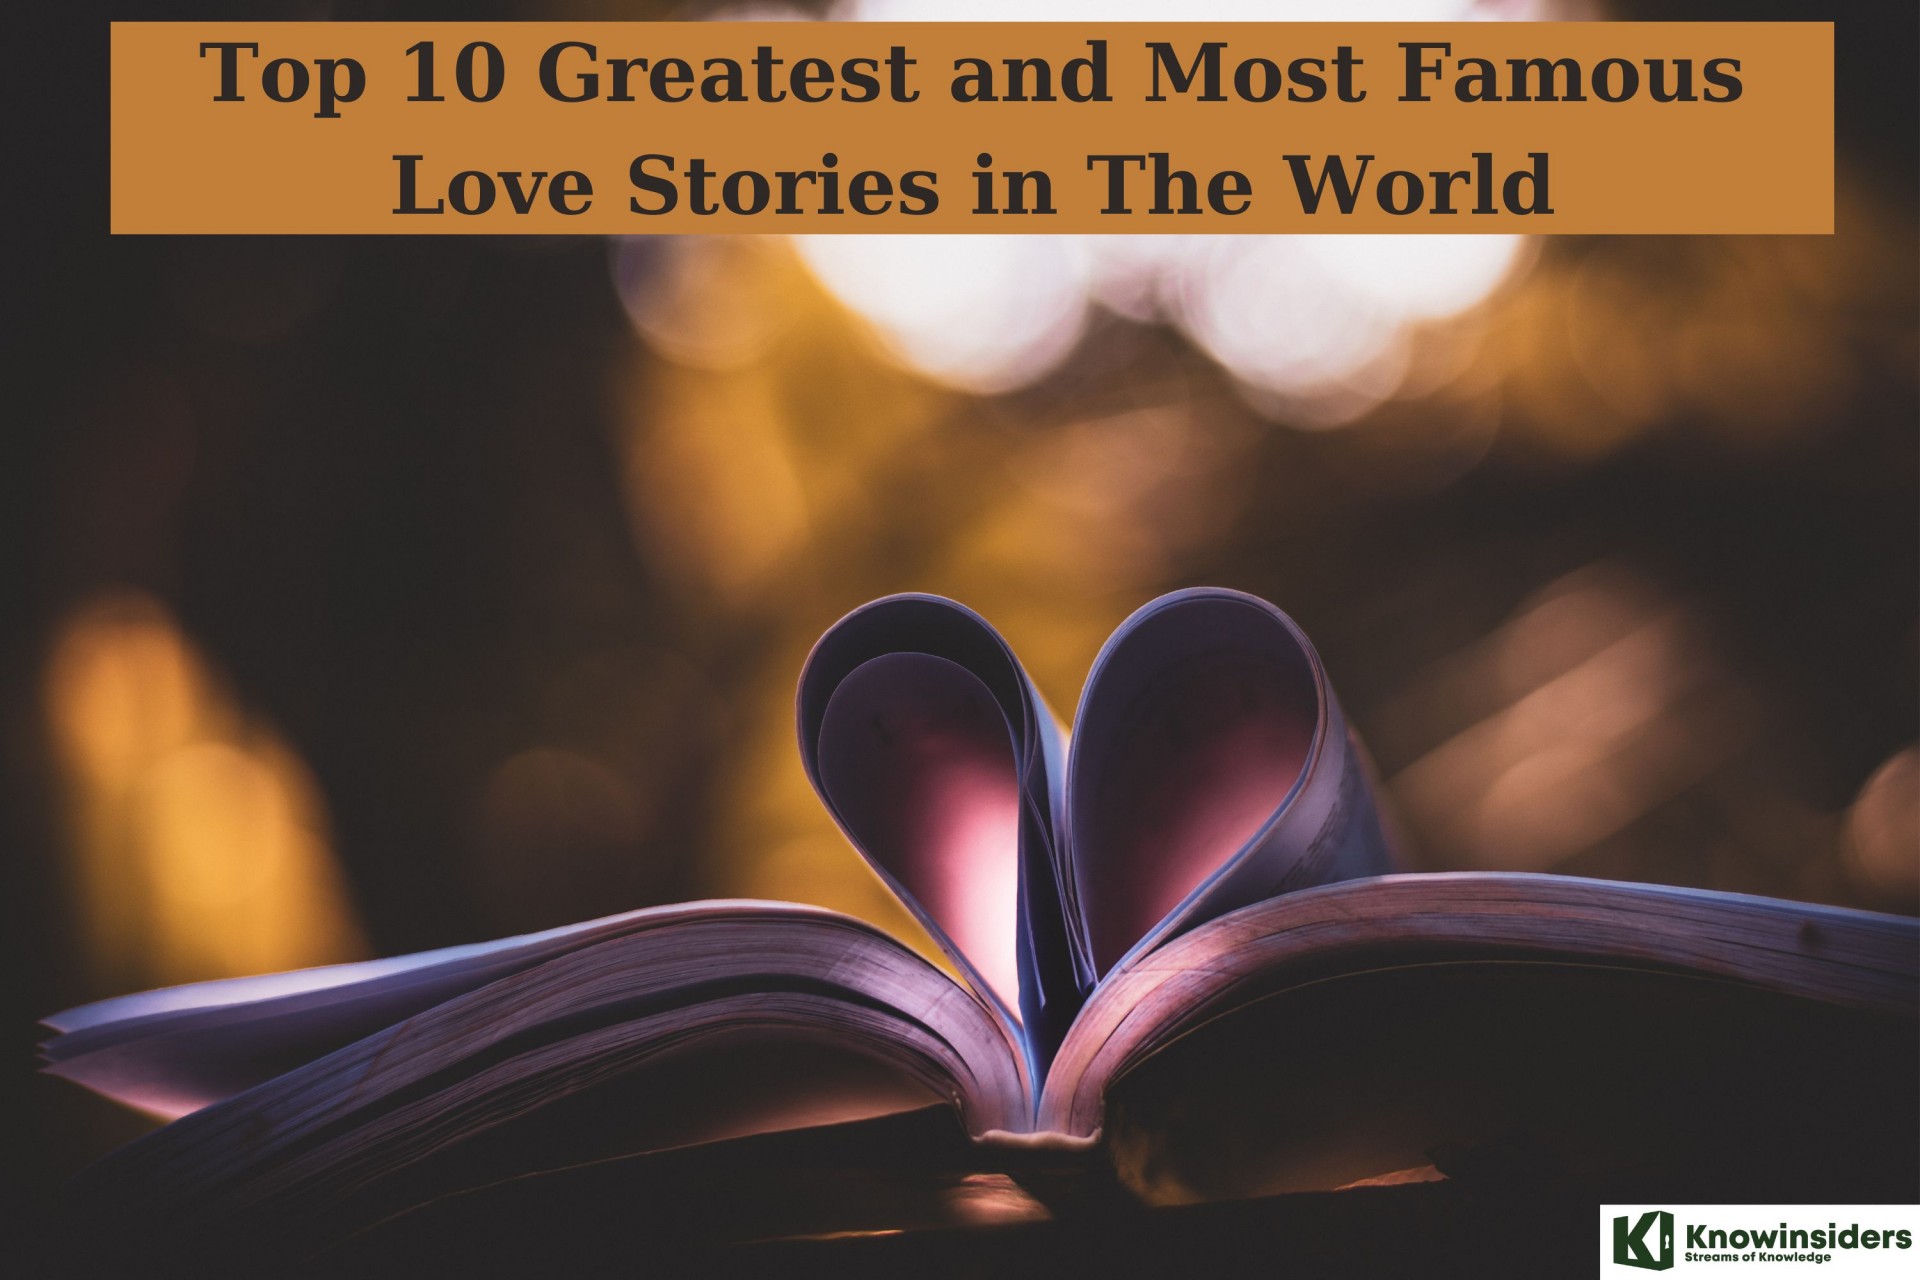 Top 10 Greatest Love Stories in The World of All Time